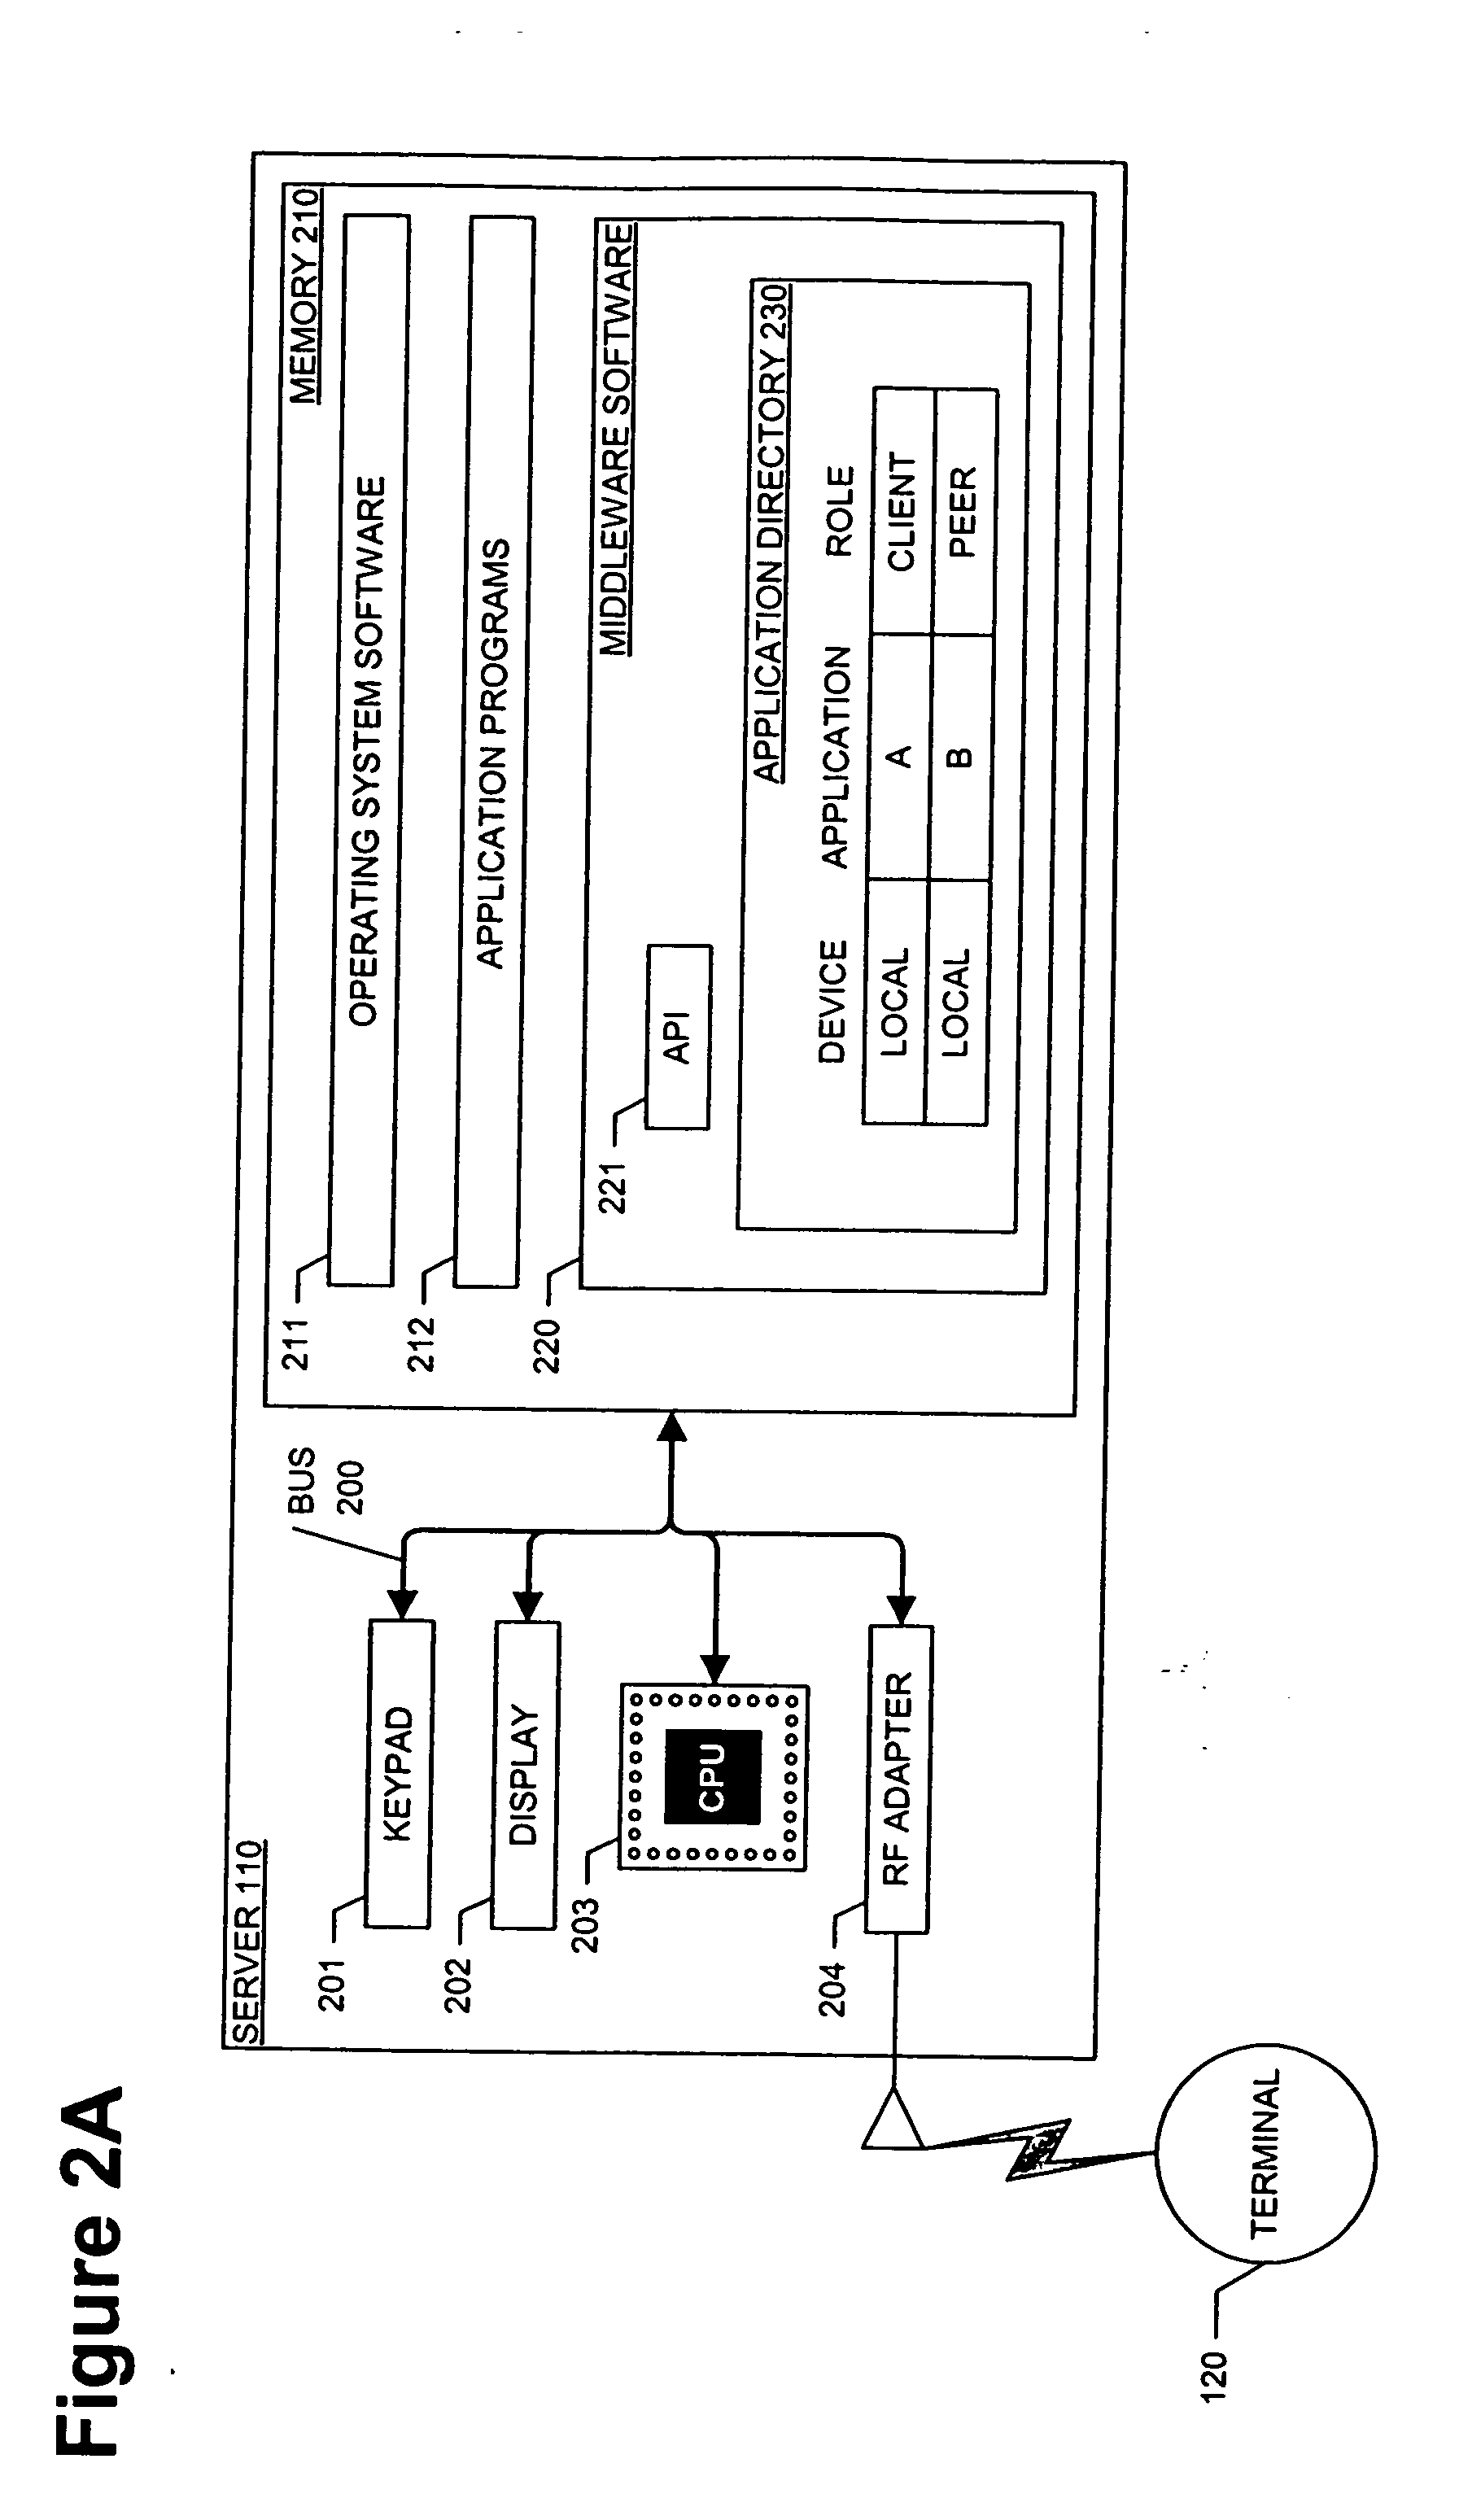 Device detection and service discovery system and method for a mobile ad hoc communications network